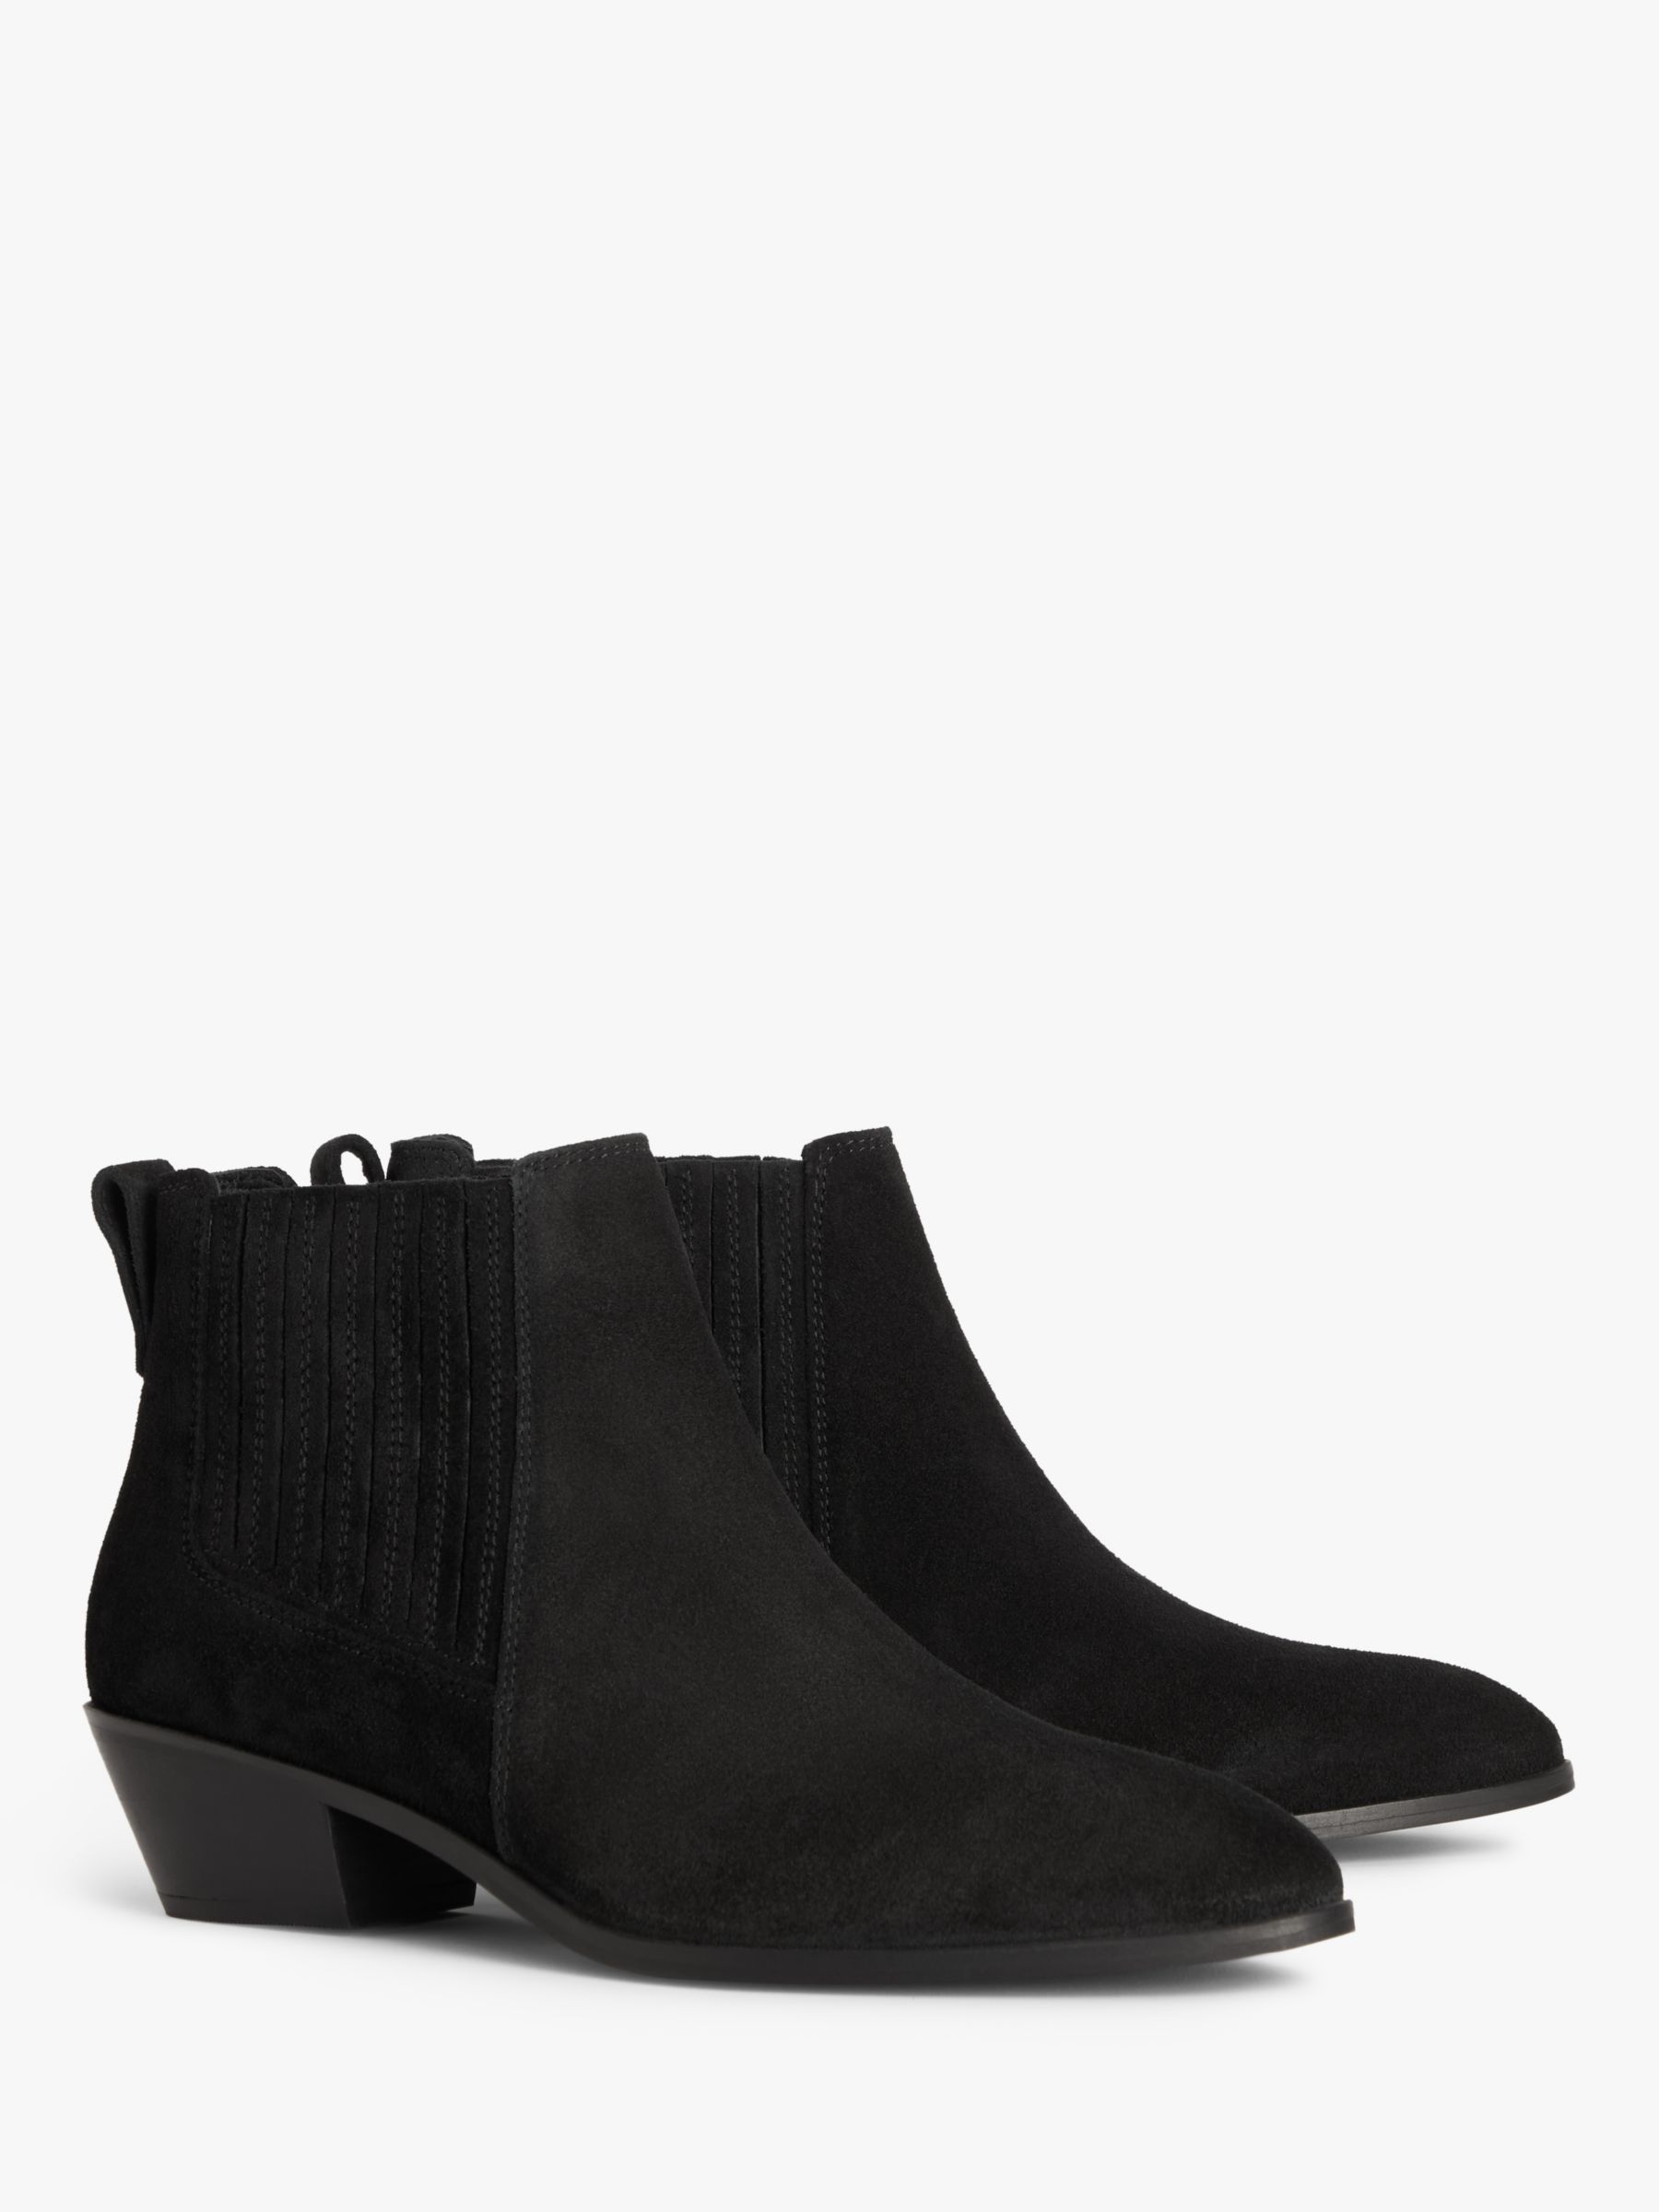 Buy John Lewis Porto Cropped Almond Toe Western Boots Online at johnlewis.com